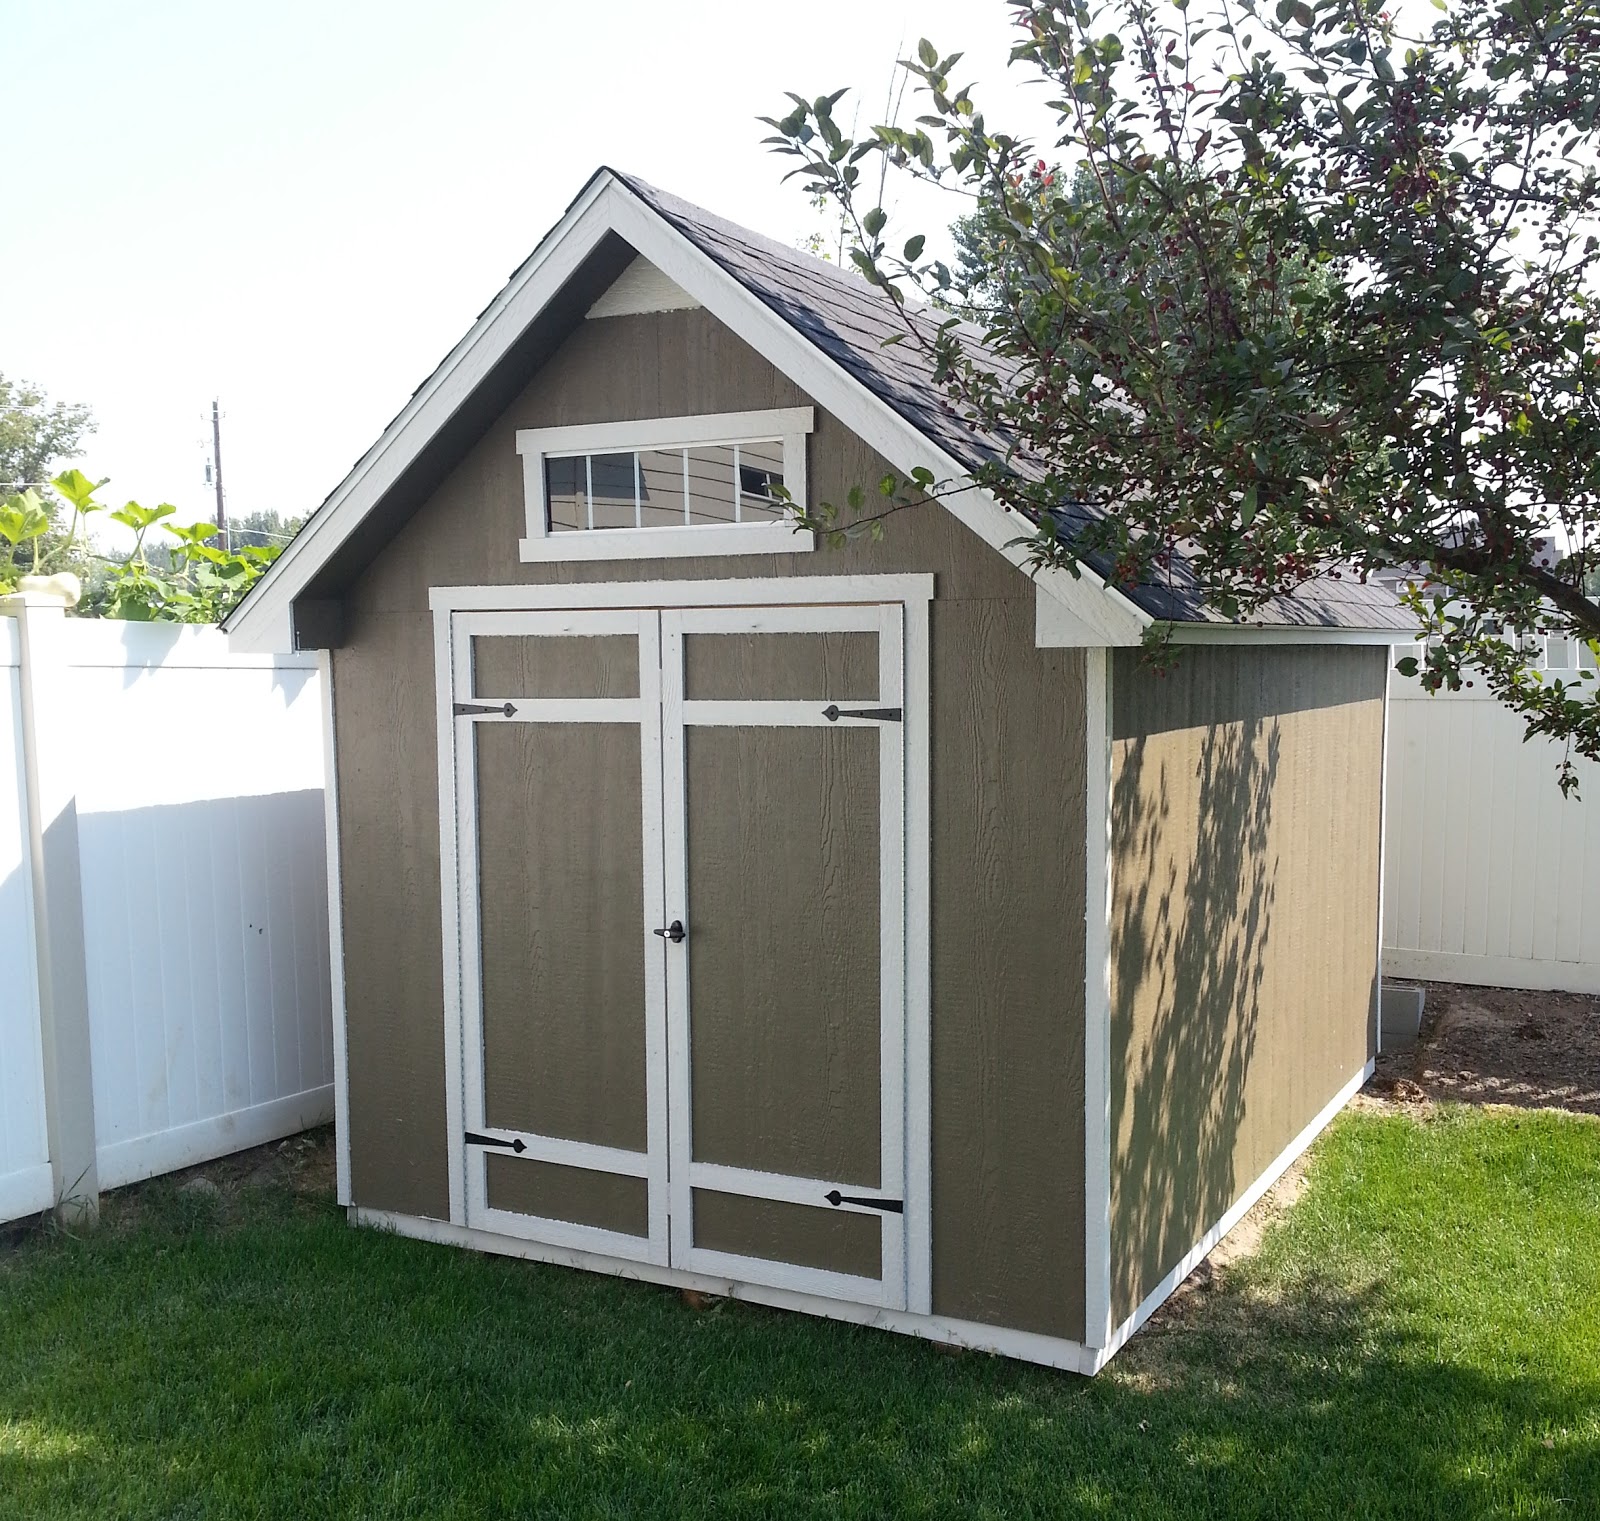 Costco Yardline Everton Shed Review ~ Review Spew